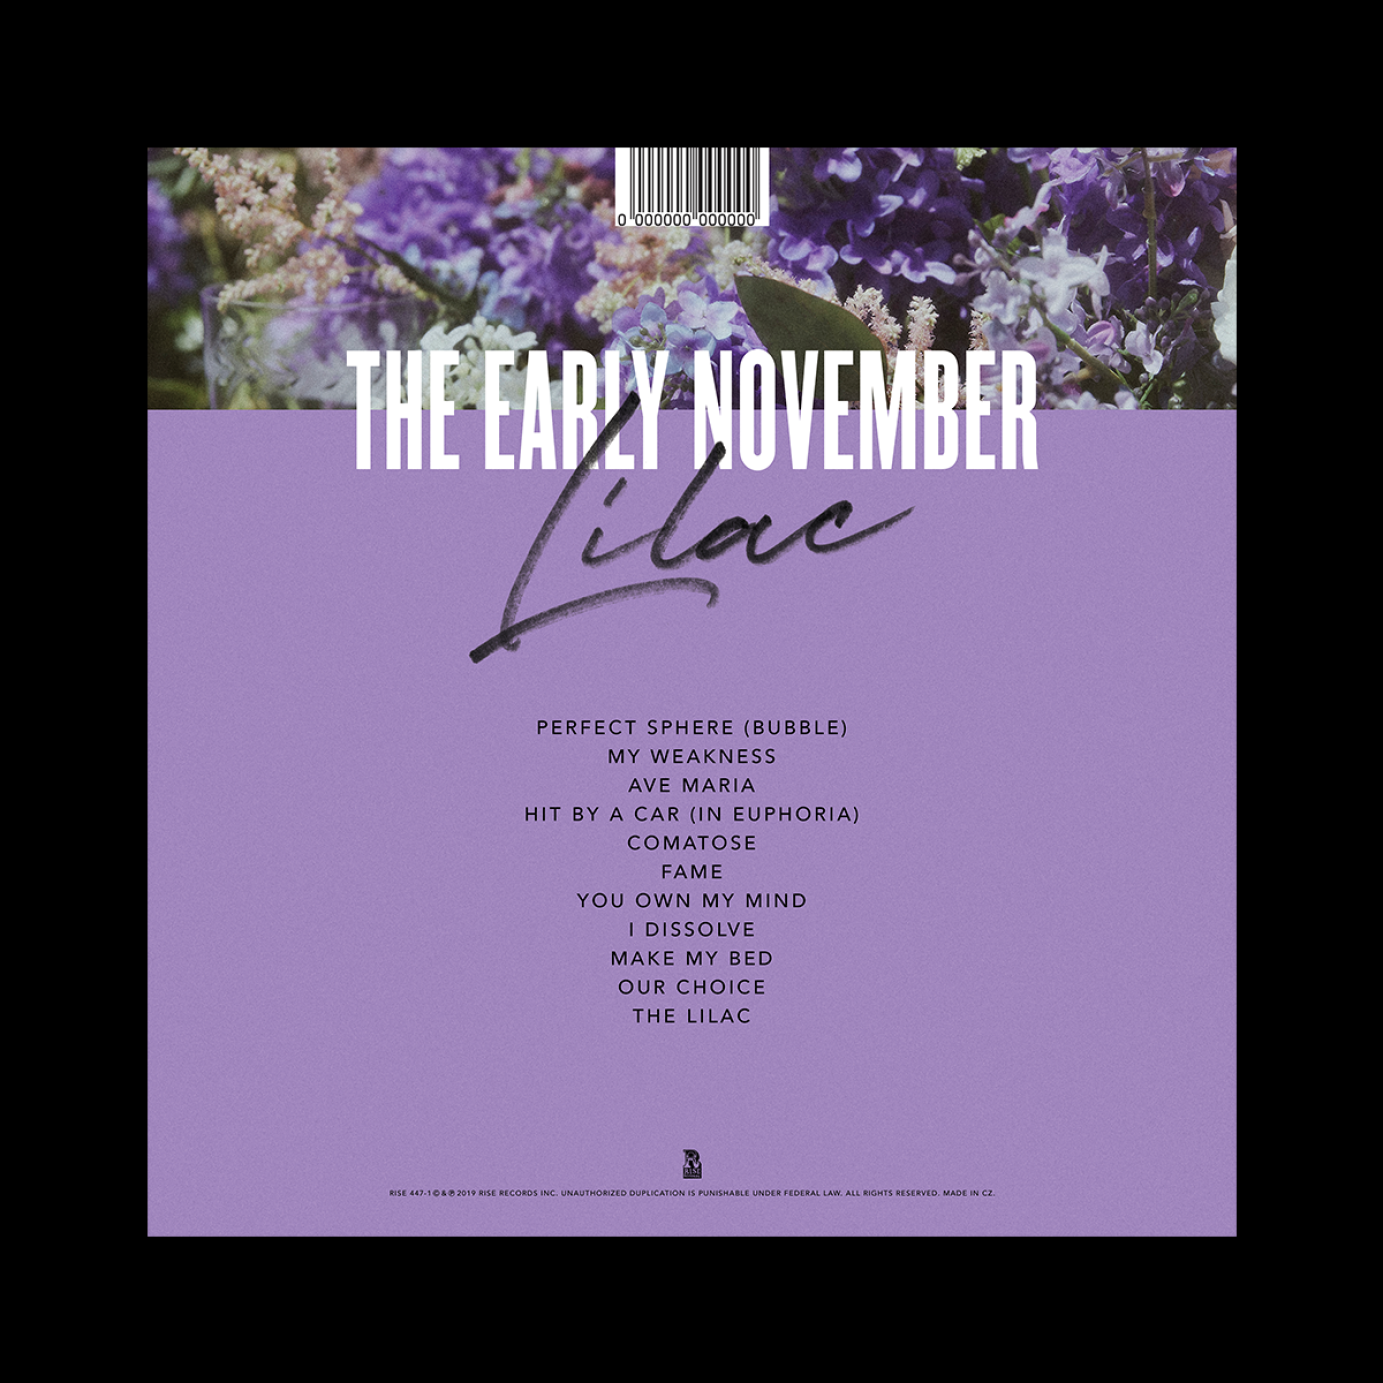 The Early November - Lilac LP Layout